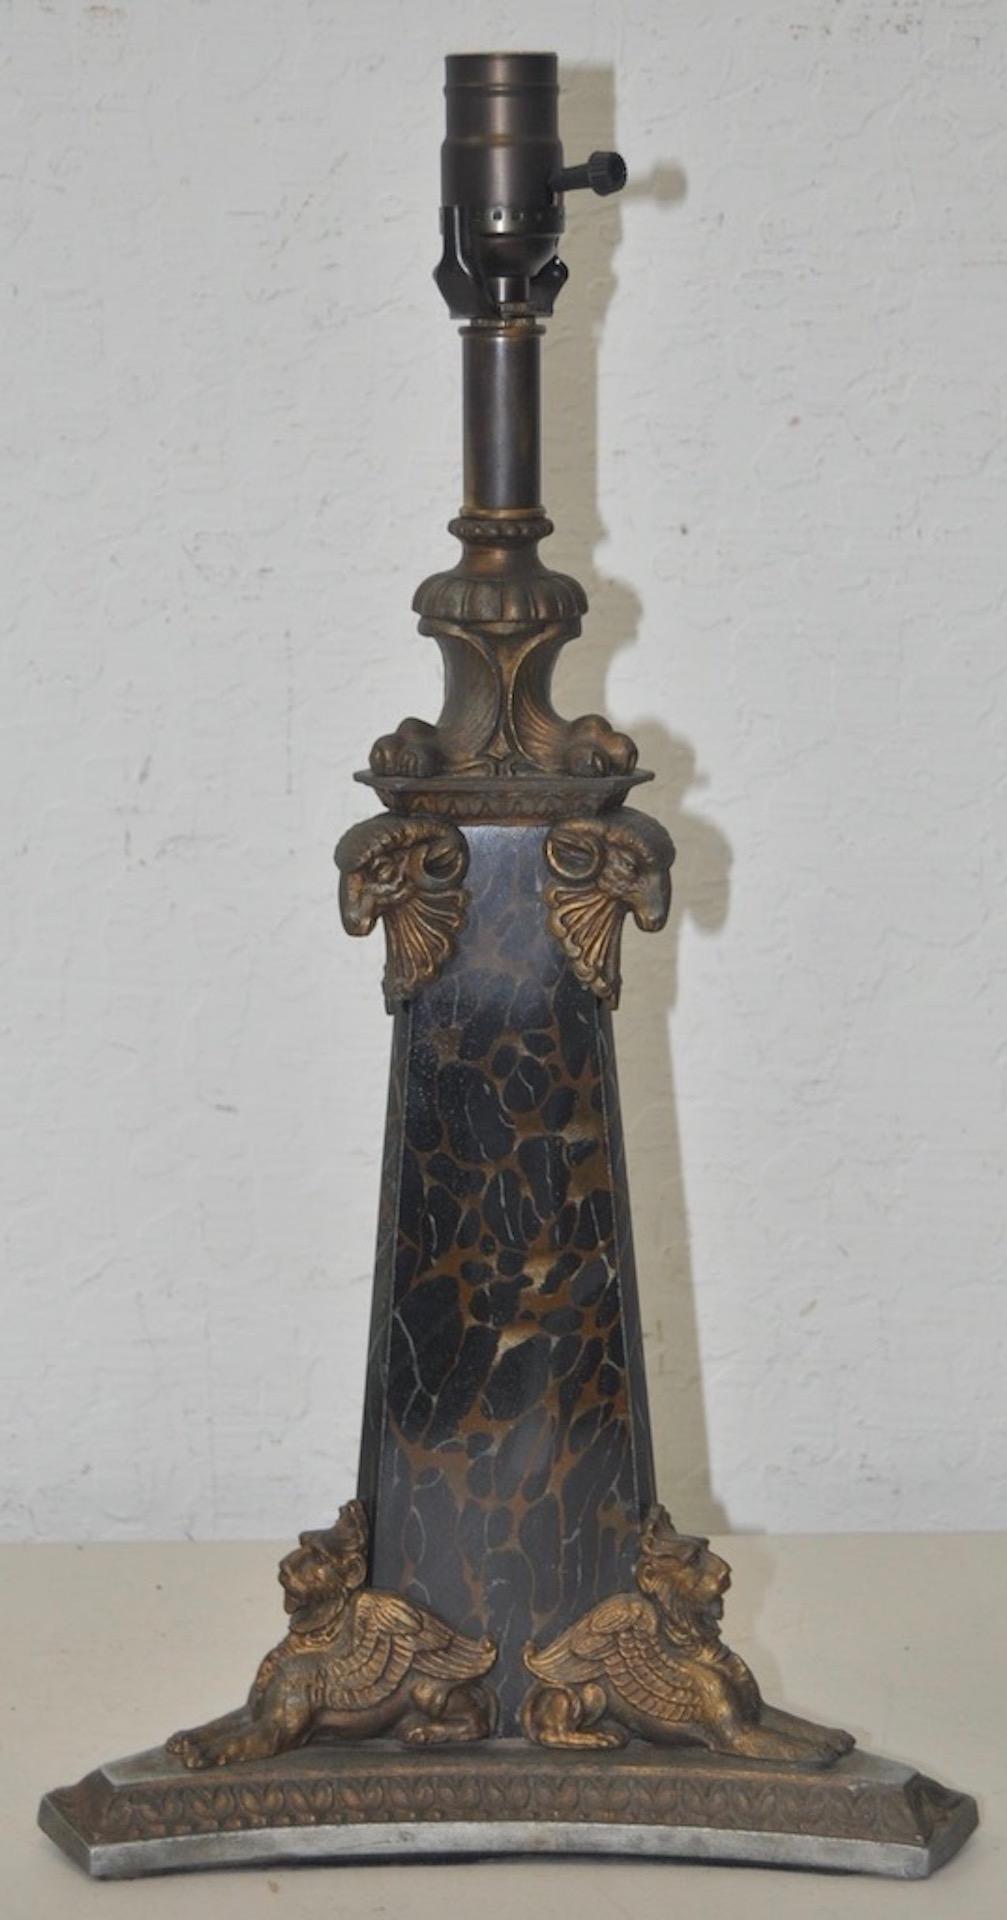 Egyptian revival cast iron faux marble table lamp, circa 1900

Pyramid shaped cast iron table lamp with a hand painted faux marble body and brass ormolu mounts.

The top mounts show one of the earliest Egyptian gods 